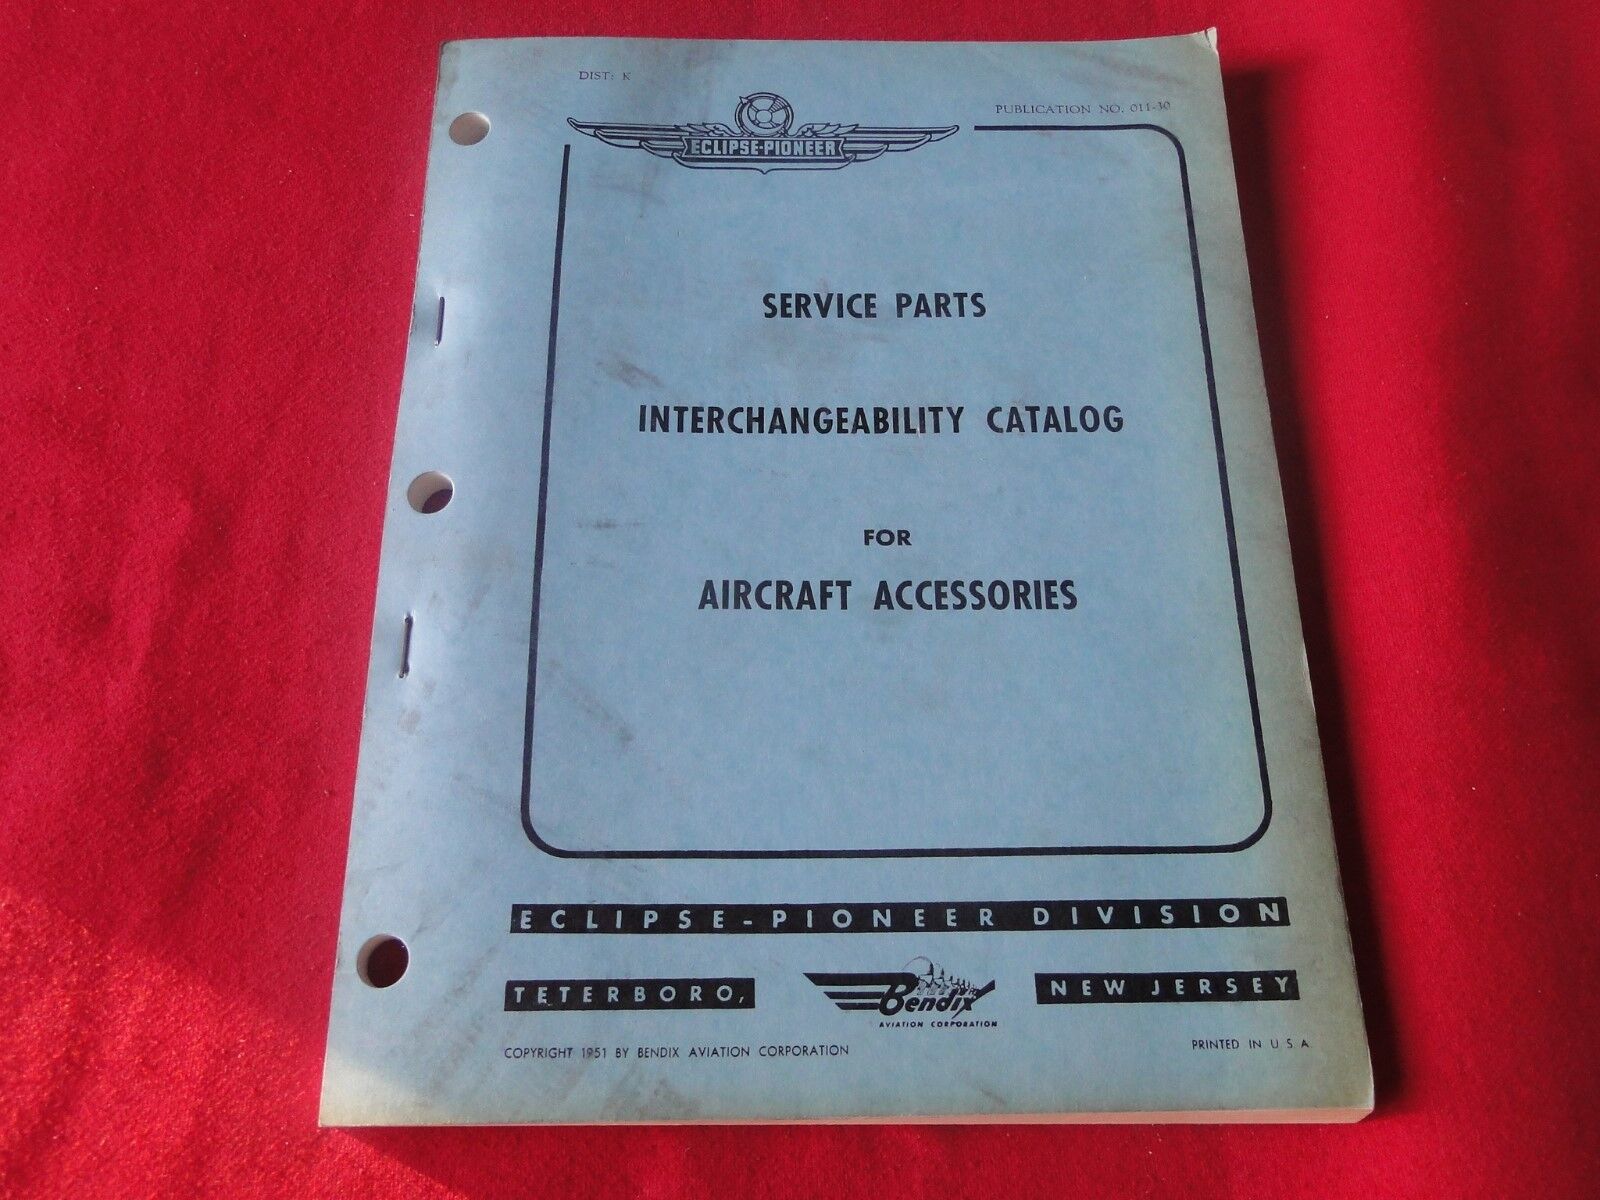 Vintage Eclipse-Pioneer Service Parts Interchangeability Catalog for Aircraft